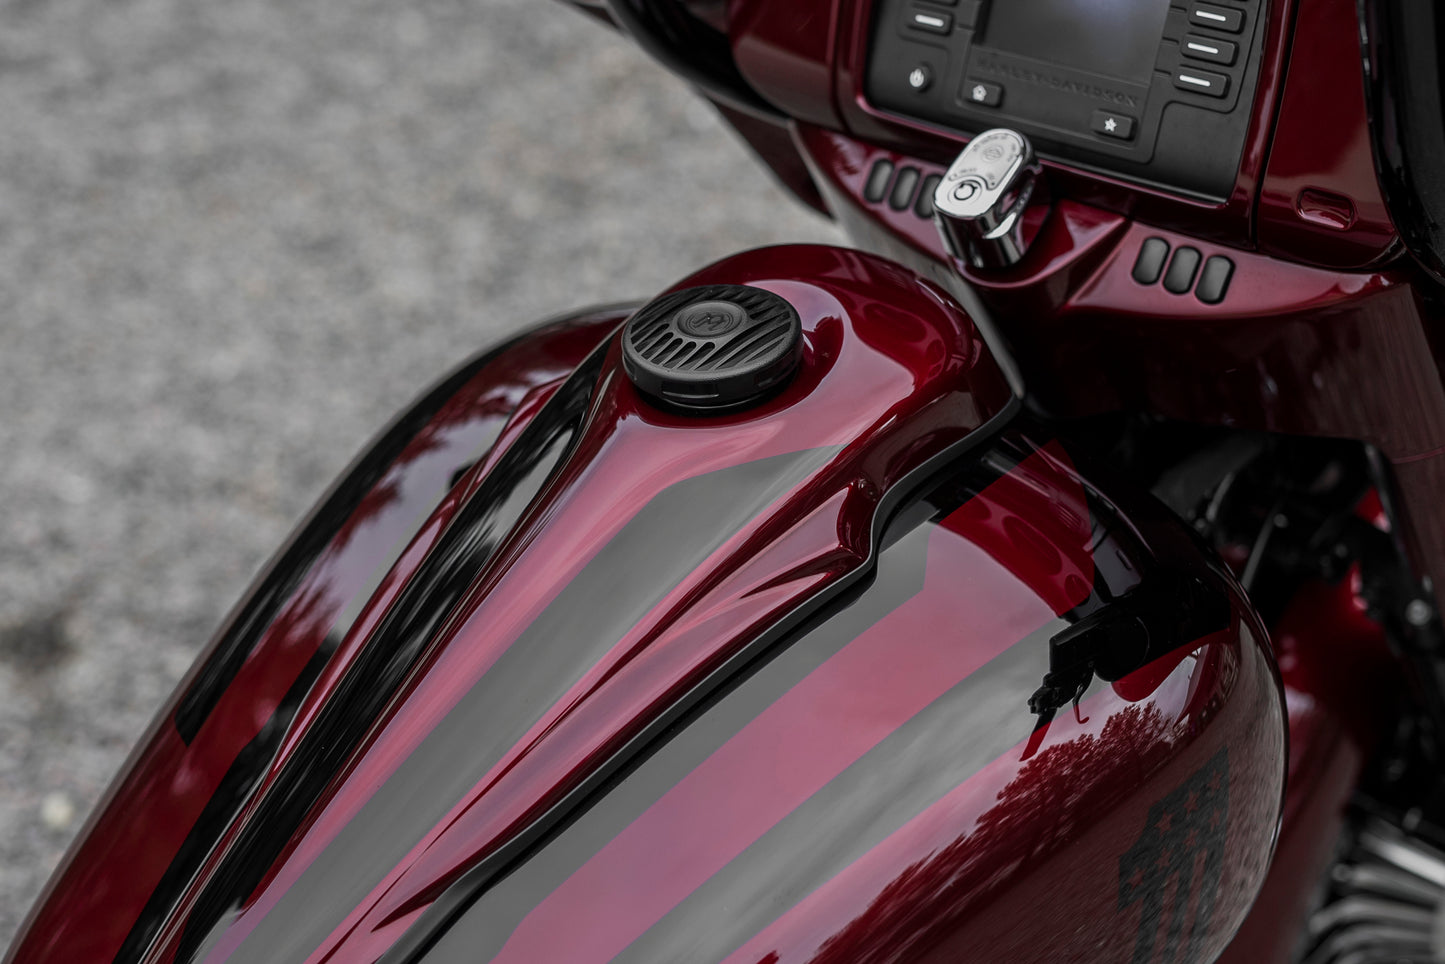 Zoomed Harley Davidson motorcycle with Killer Custom gas tank console from above blurred background